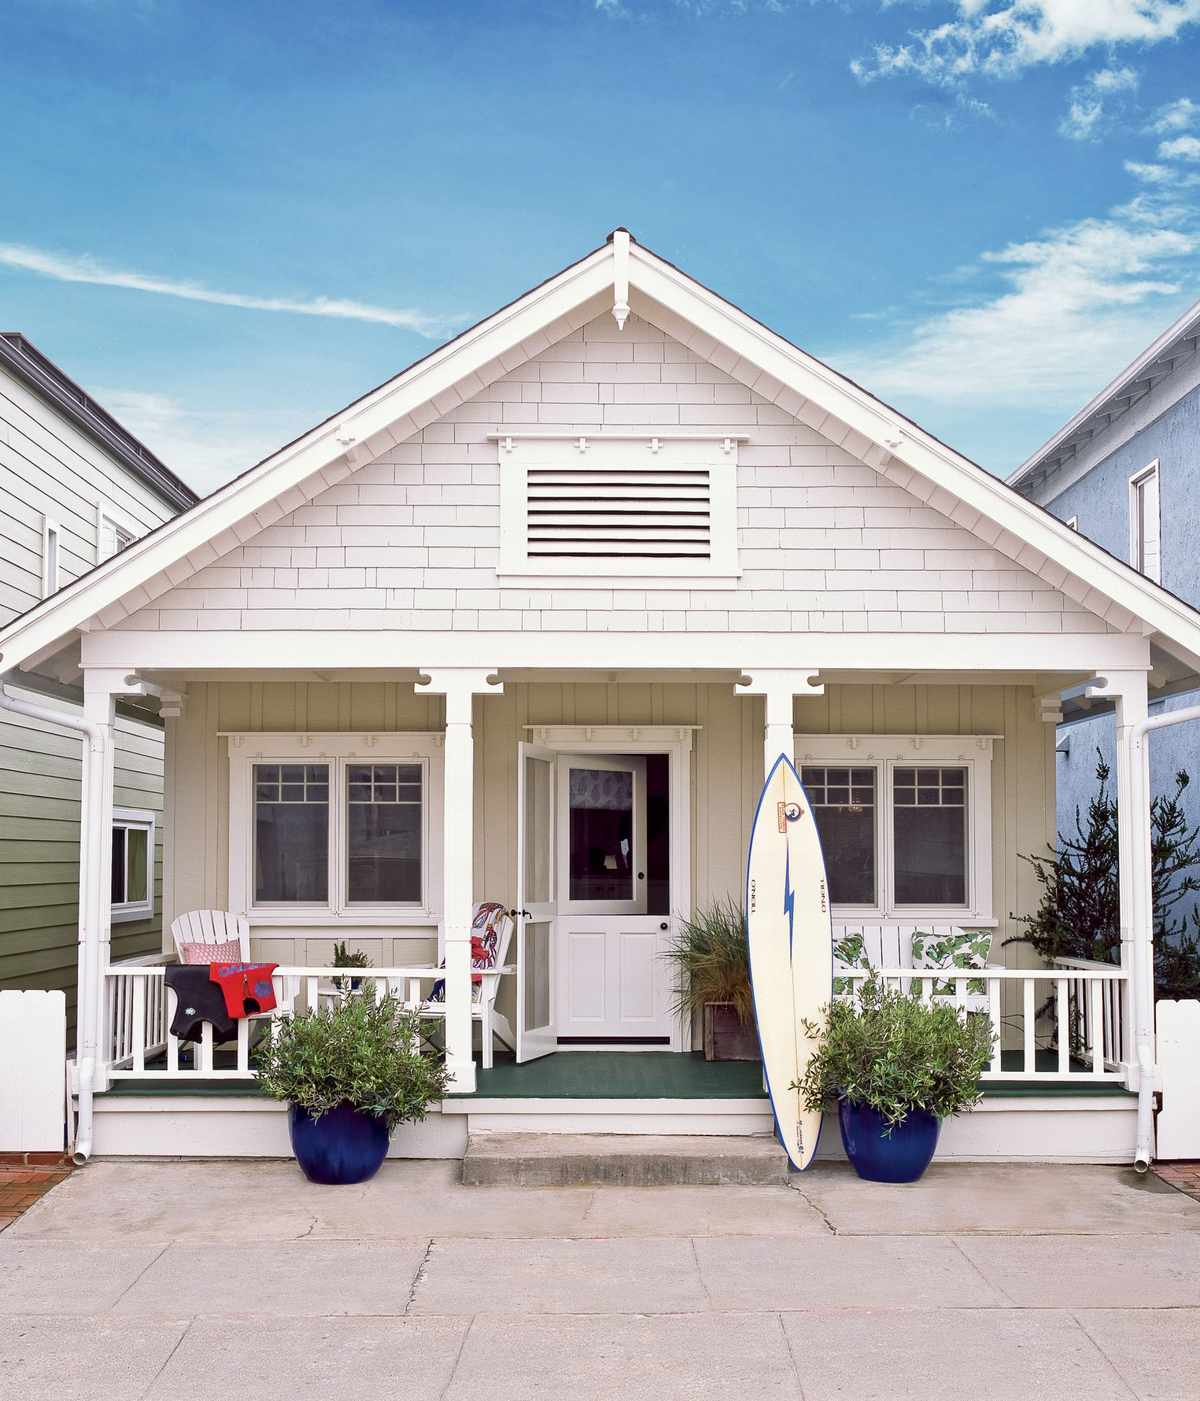 <p>When Susan and Spencer Croul stumbled upon this cottage, they wanted to preserve the cottage's elements that made it so unique and charming. The minimalistic front porch is a nod to this laid-back area. Surrounded by white and cream, this cozy beach cottage looks right at home near the sandy beach.</p>
                            